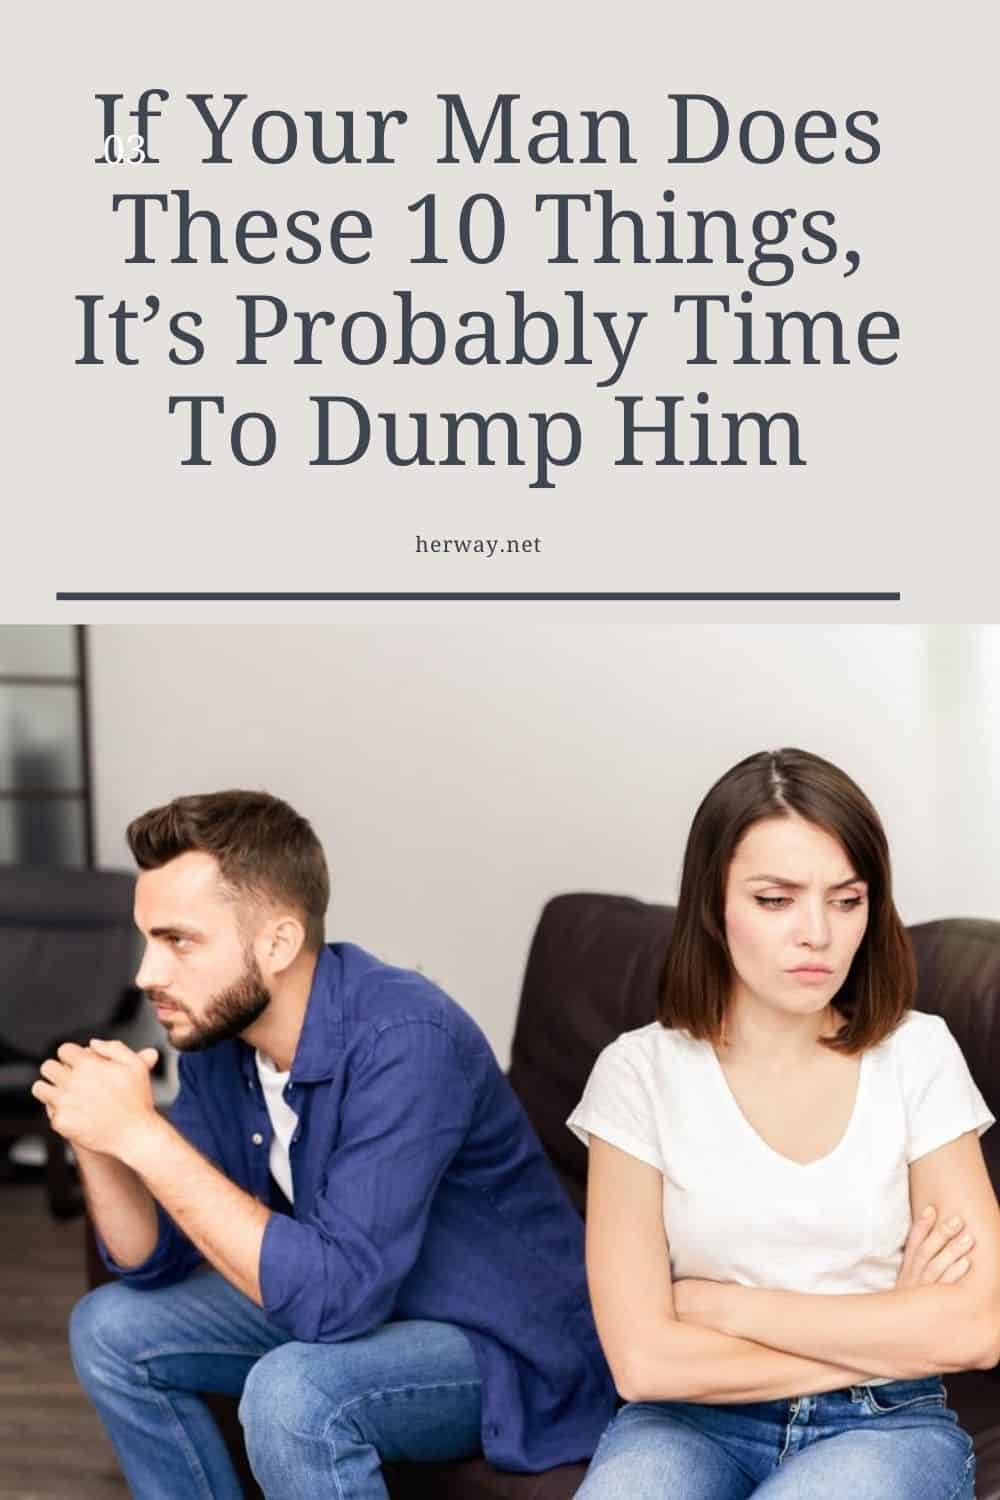 If Your Man Does These 10 Things, It’s Probably Time To Dump Him